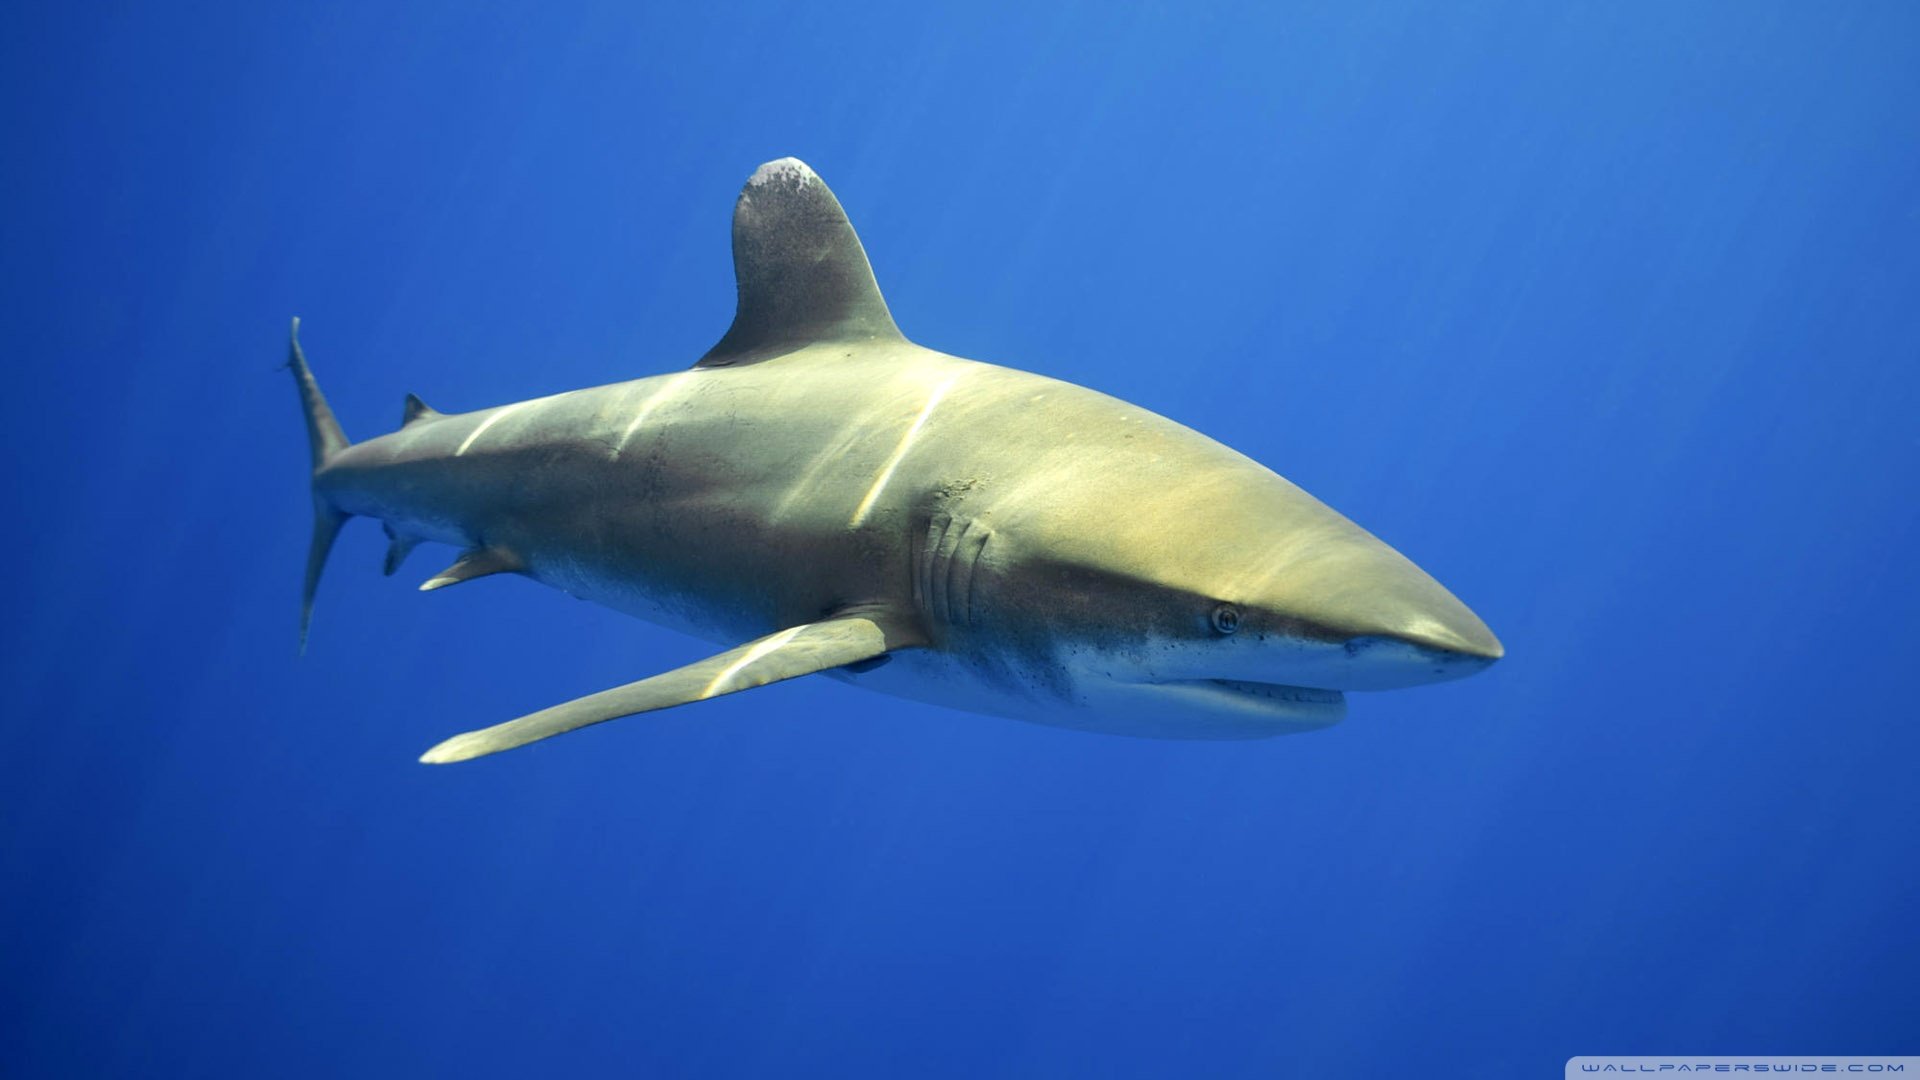 Download full hd 1080p Shark PC background ID:180640 for free